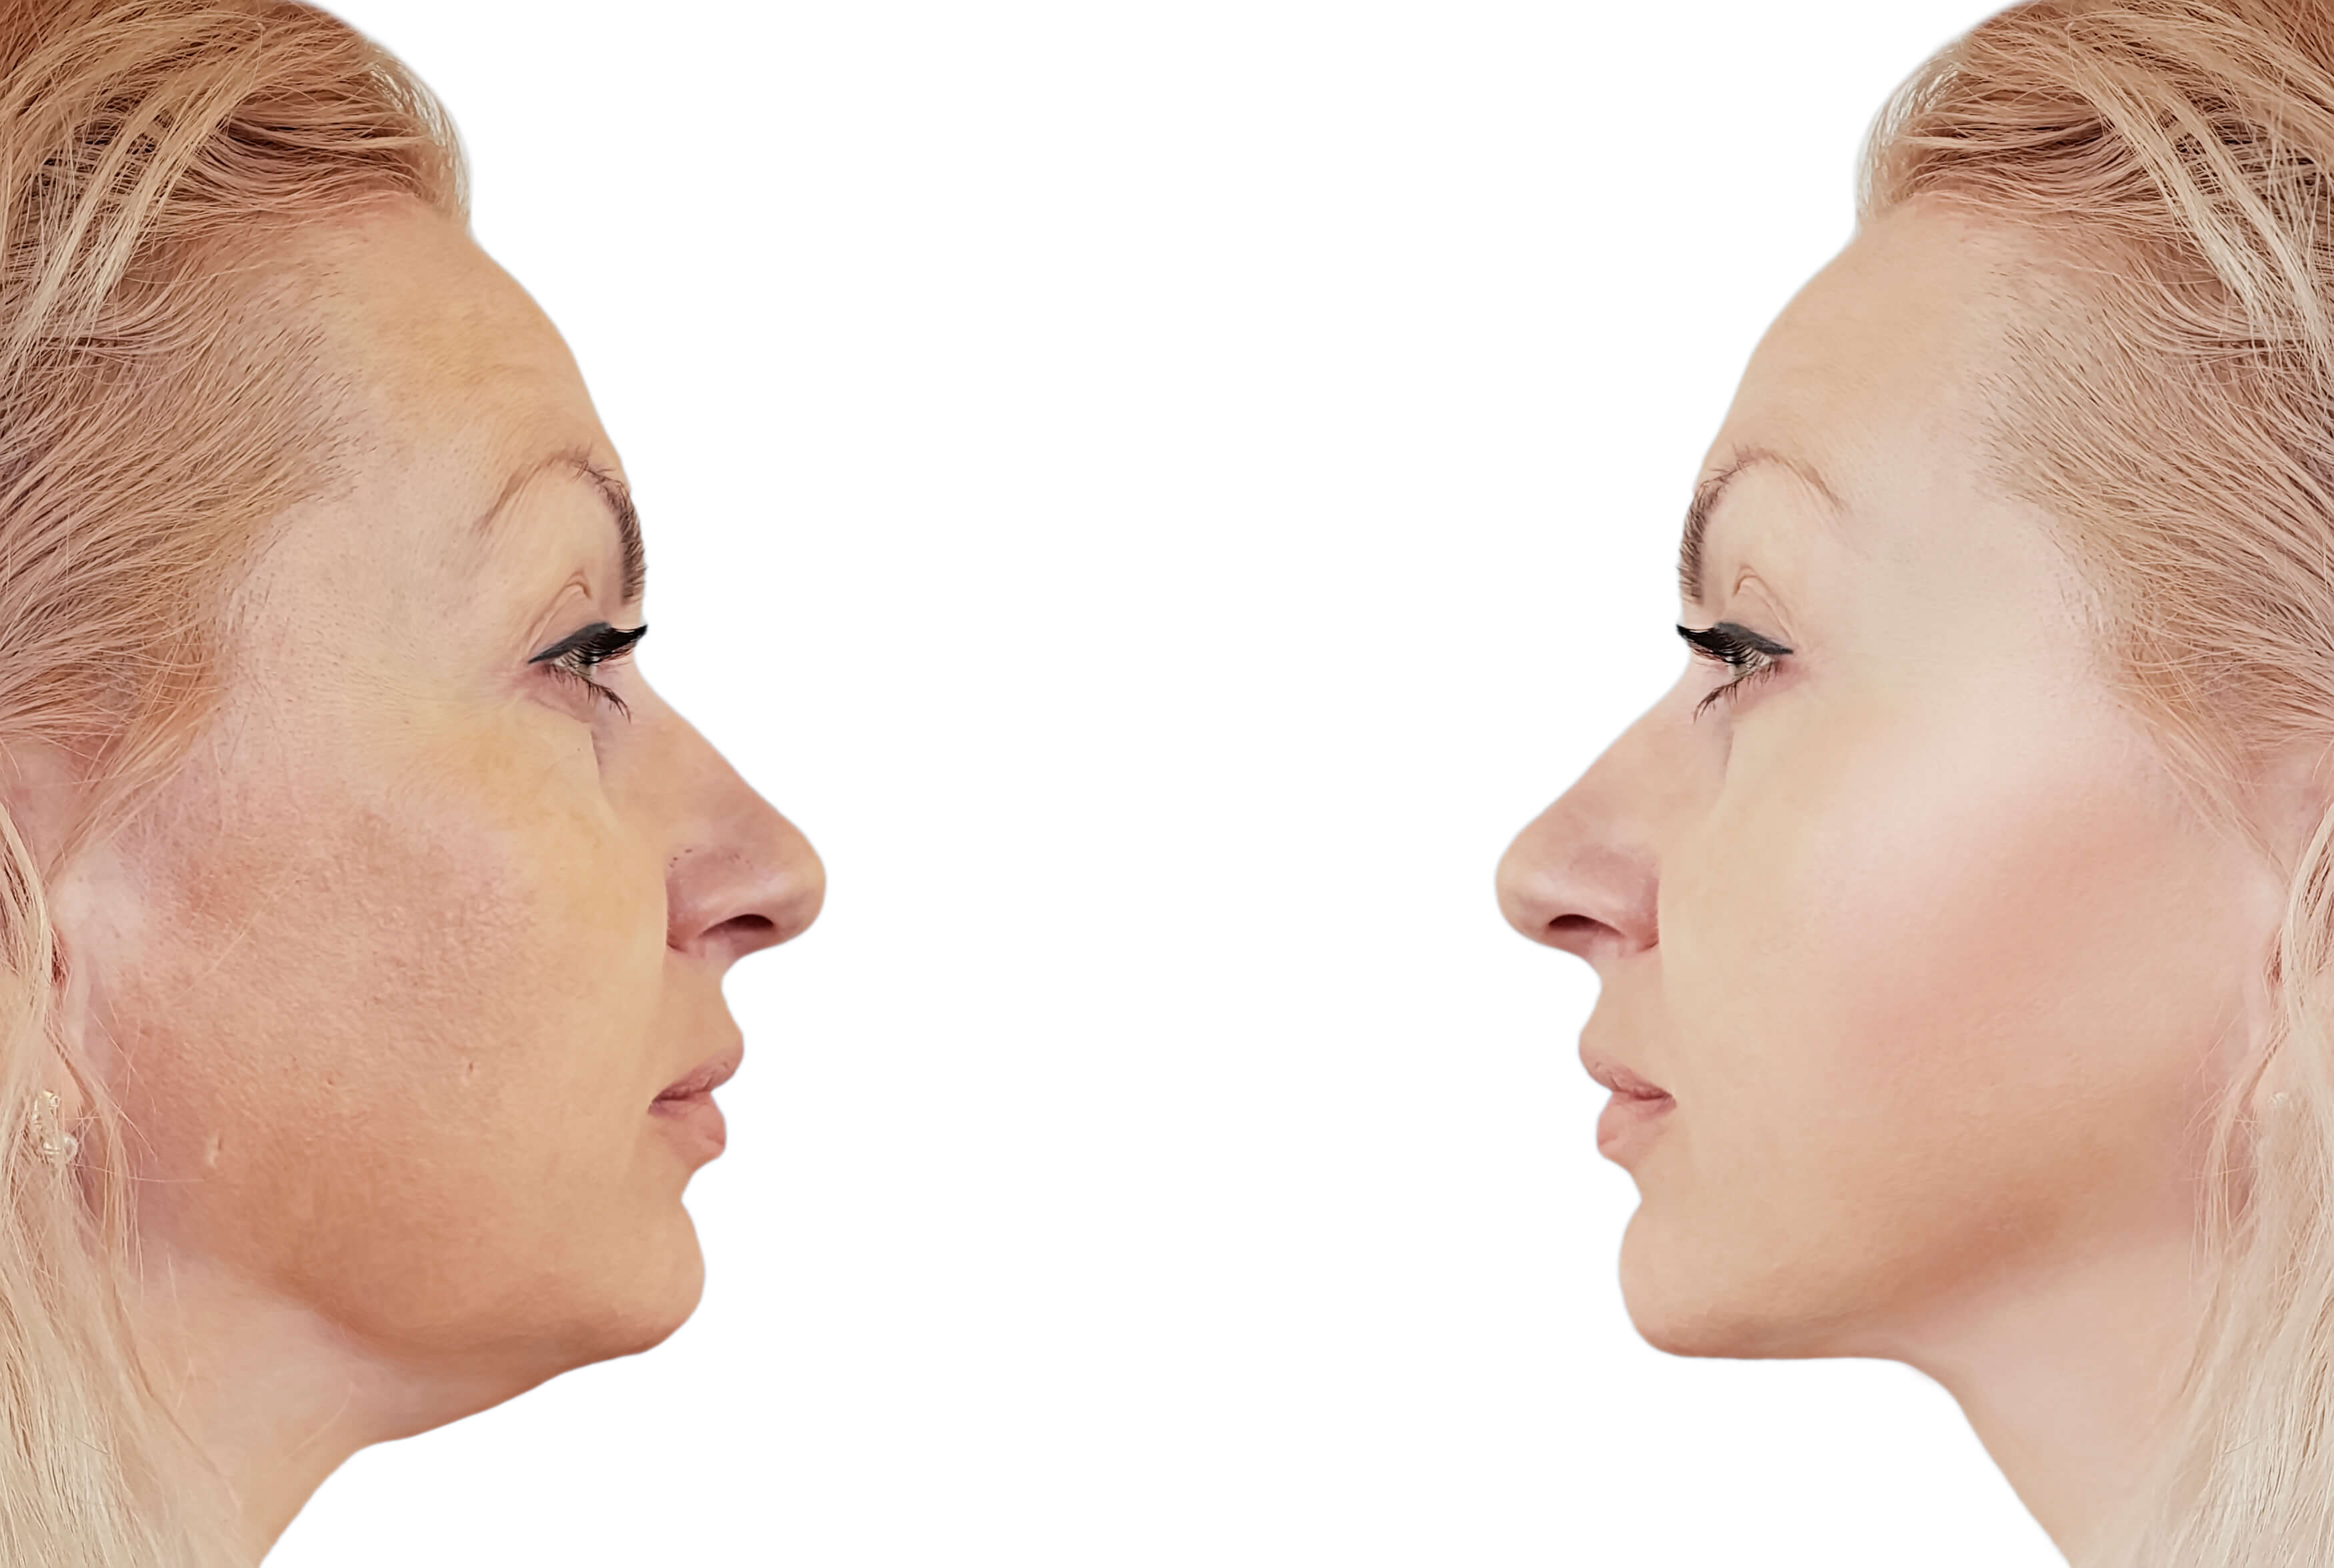 Kybella: A Non-Invasive Way to Achieve a More Defined Chin